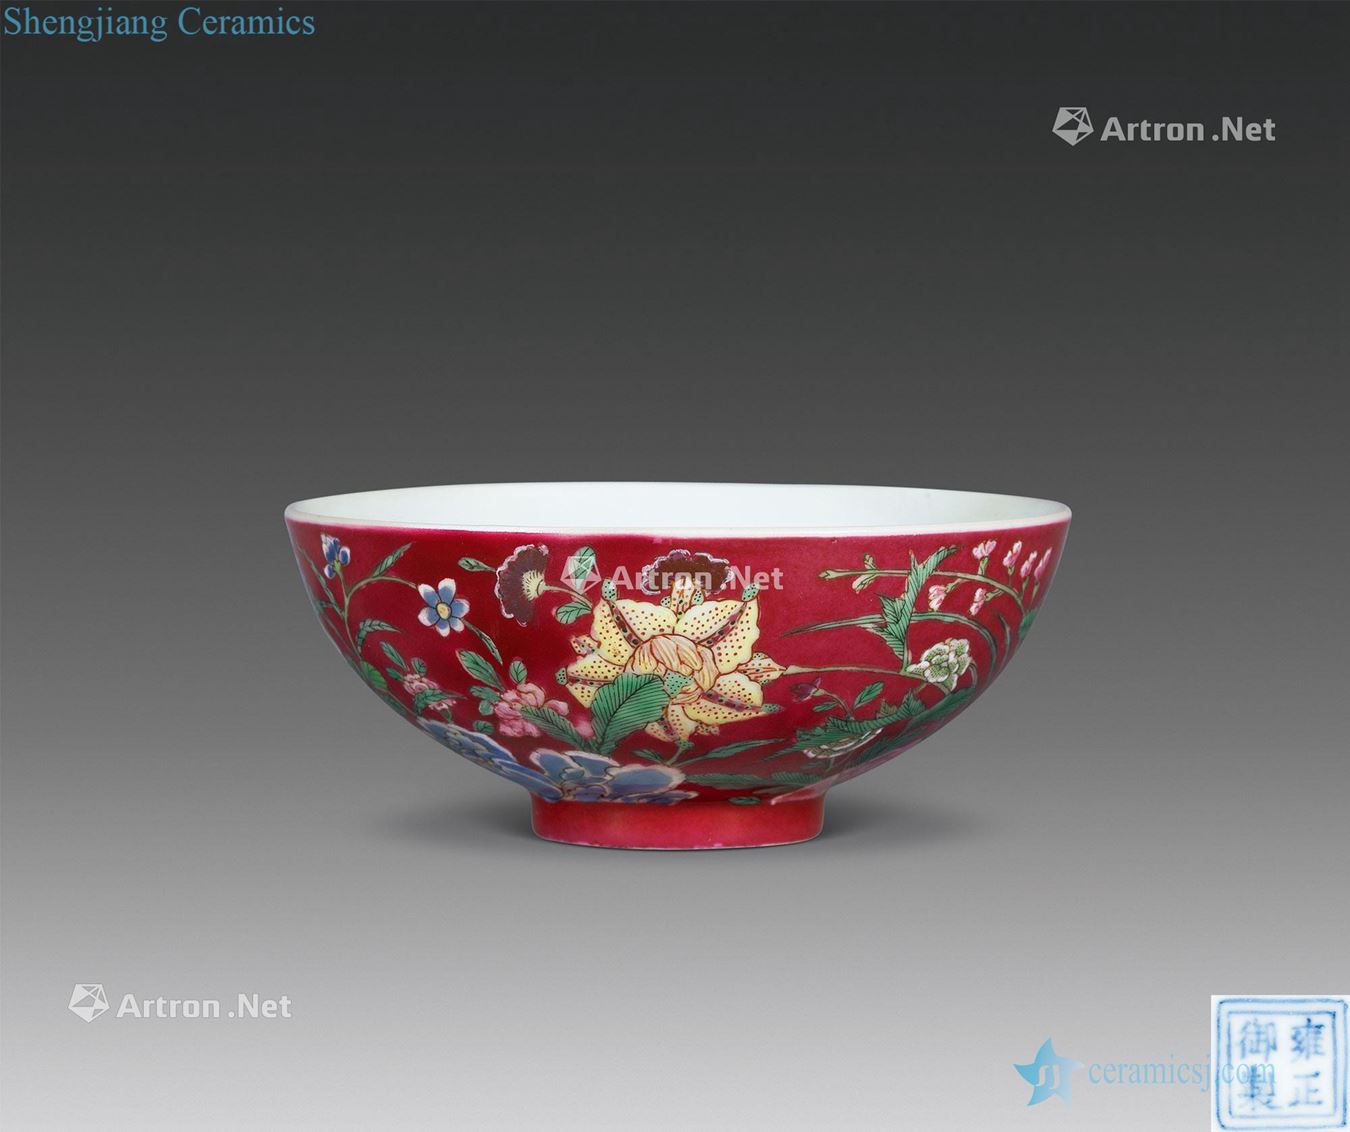 In the qing yongzheng carmine pastel 9 autumn celebration figure small bowl